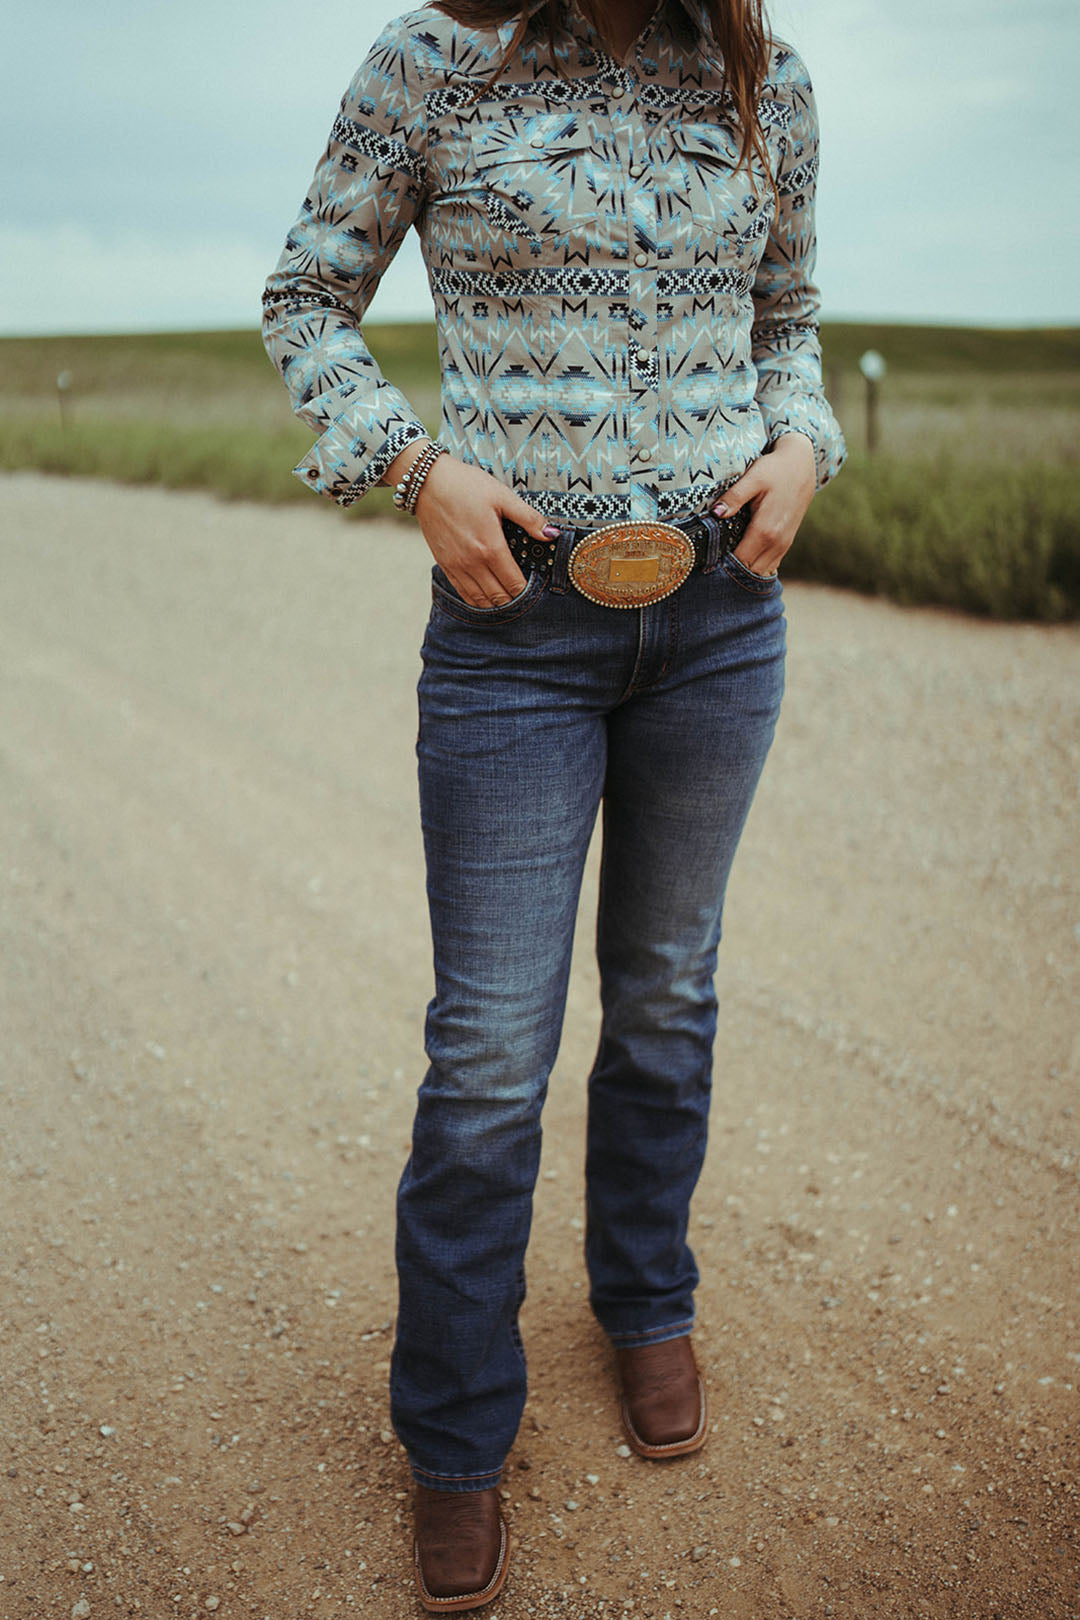 Woman standing on dirt road modeling the Womens Ultimate Riding Jean by Wrangler.  The style is Willow.